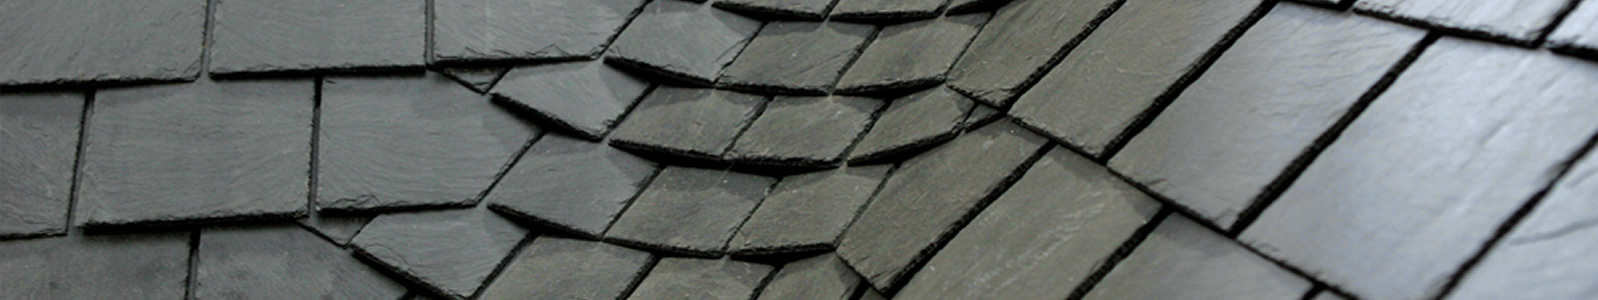 JRC Slate - Roofing Slate Suppliers for Cumbrian, Welsh, Spanish and British Slate